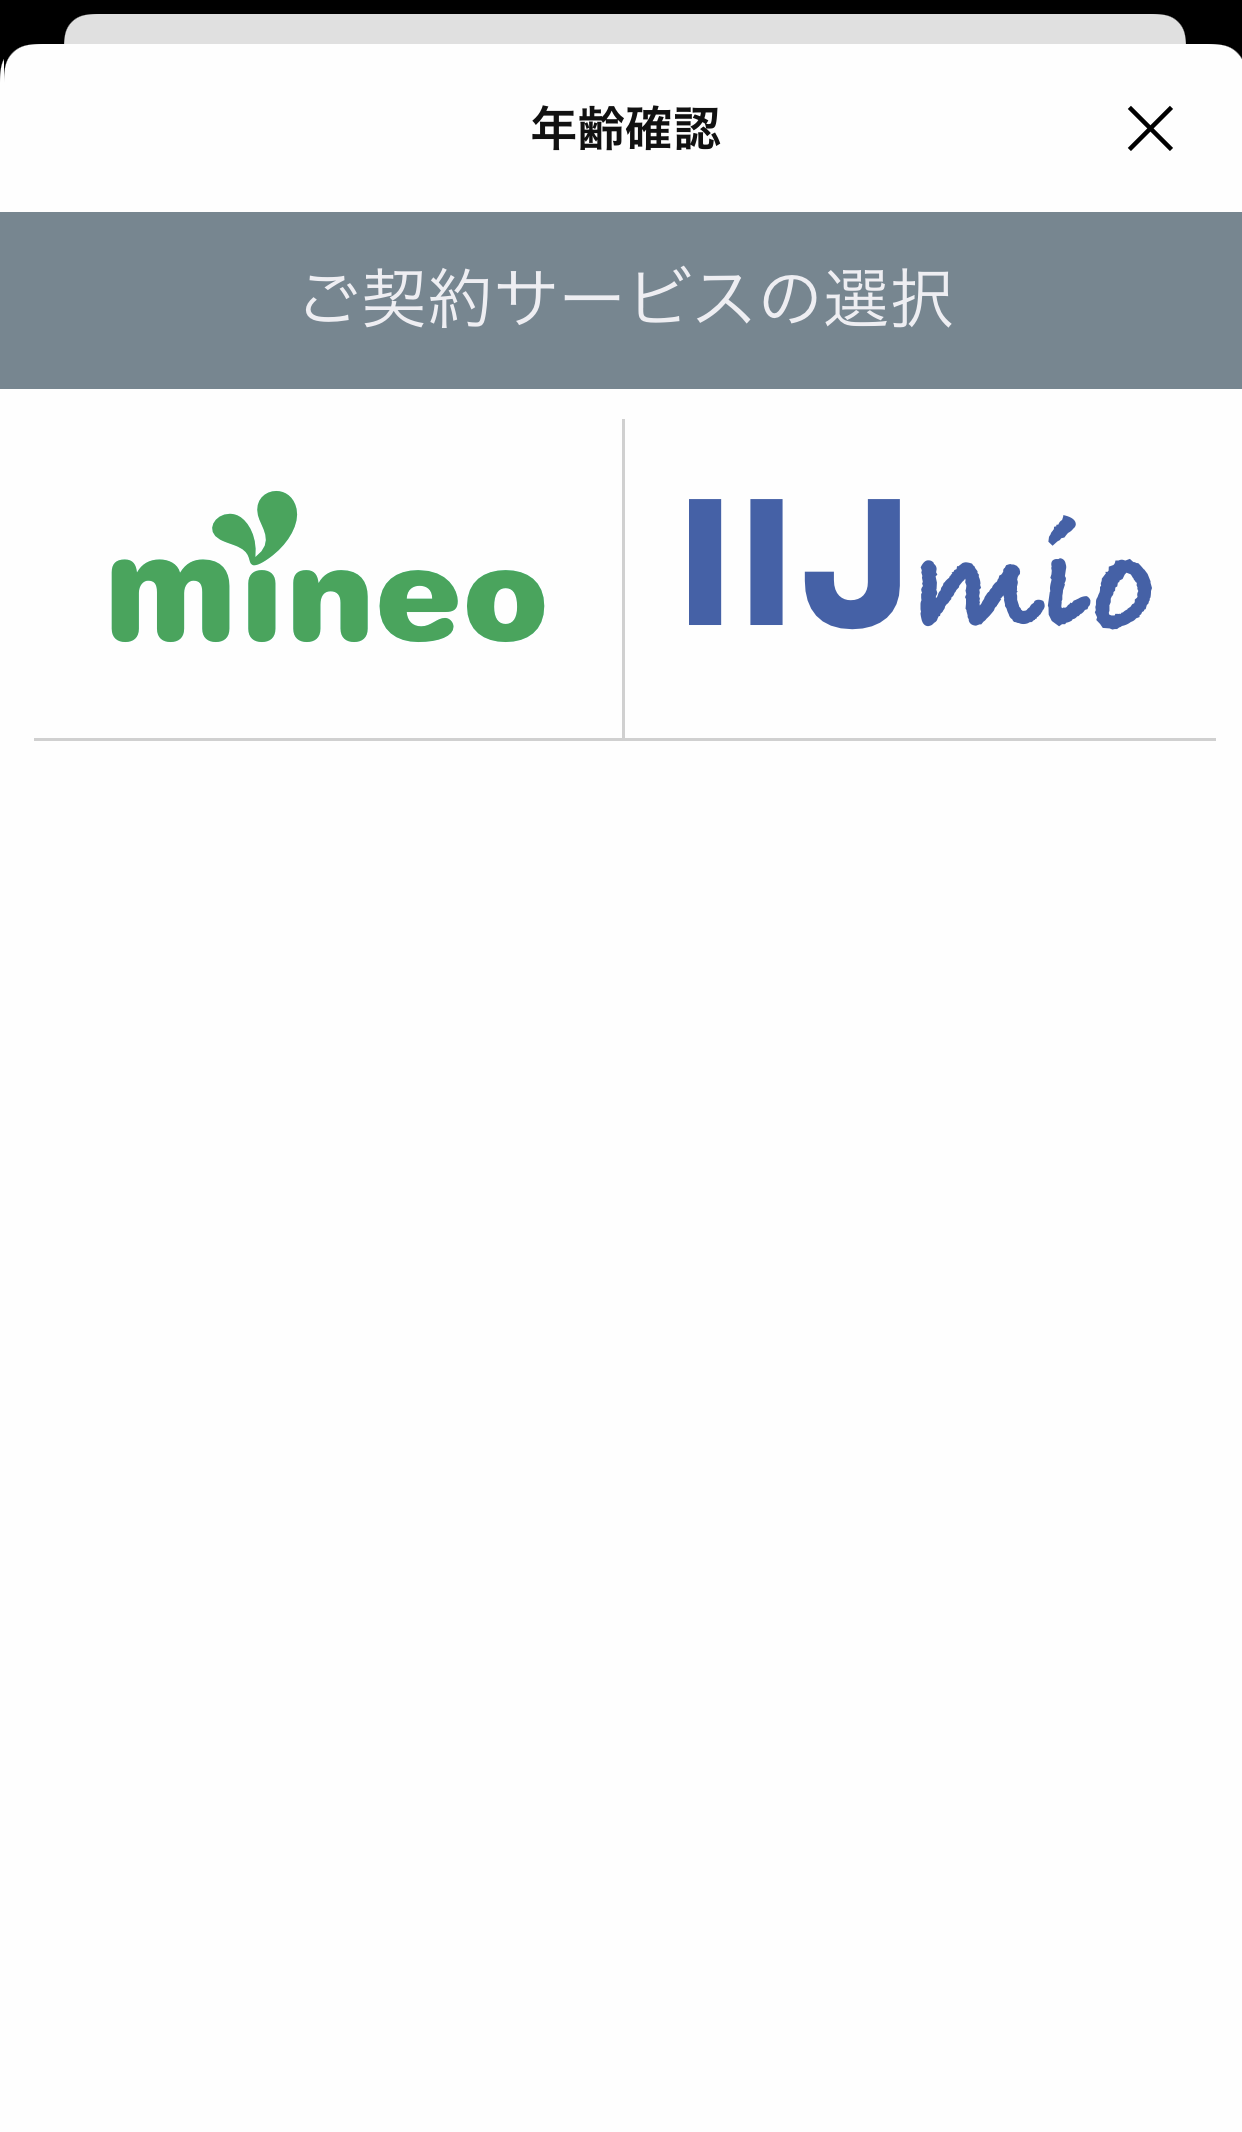 mvno_04.png